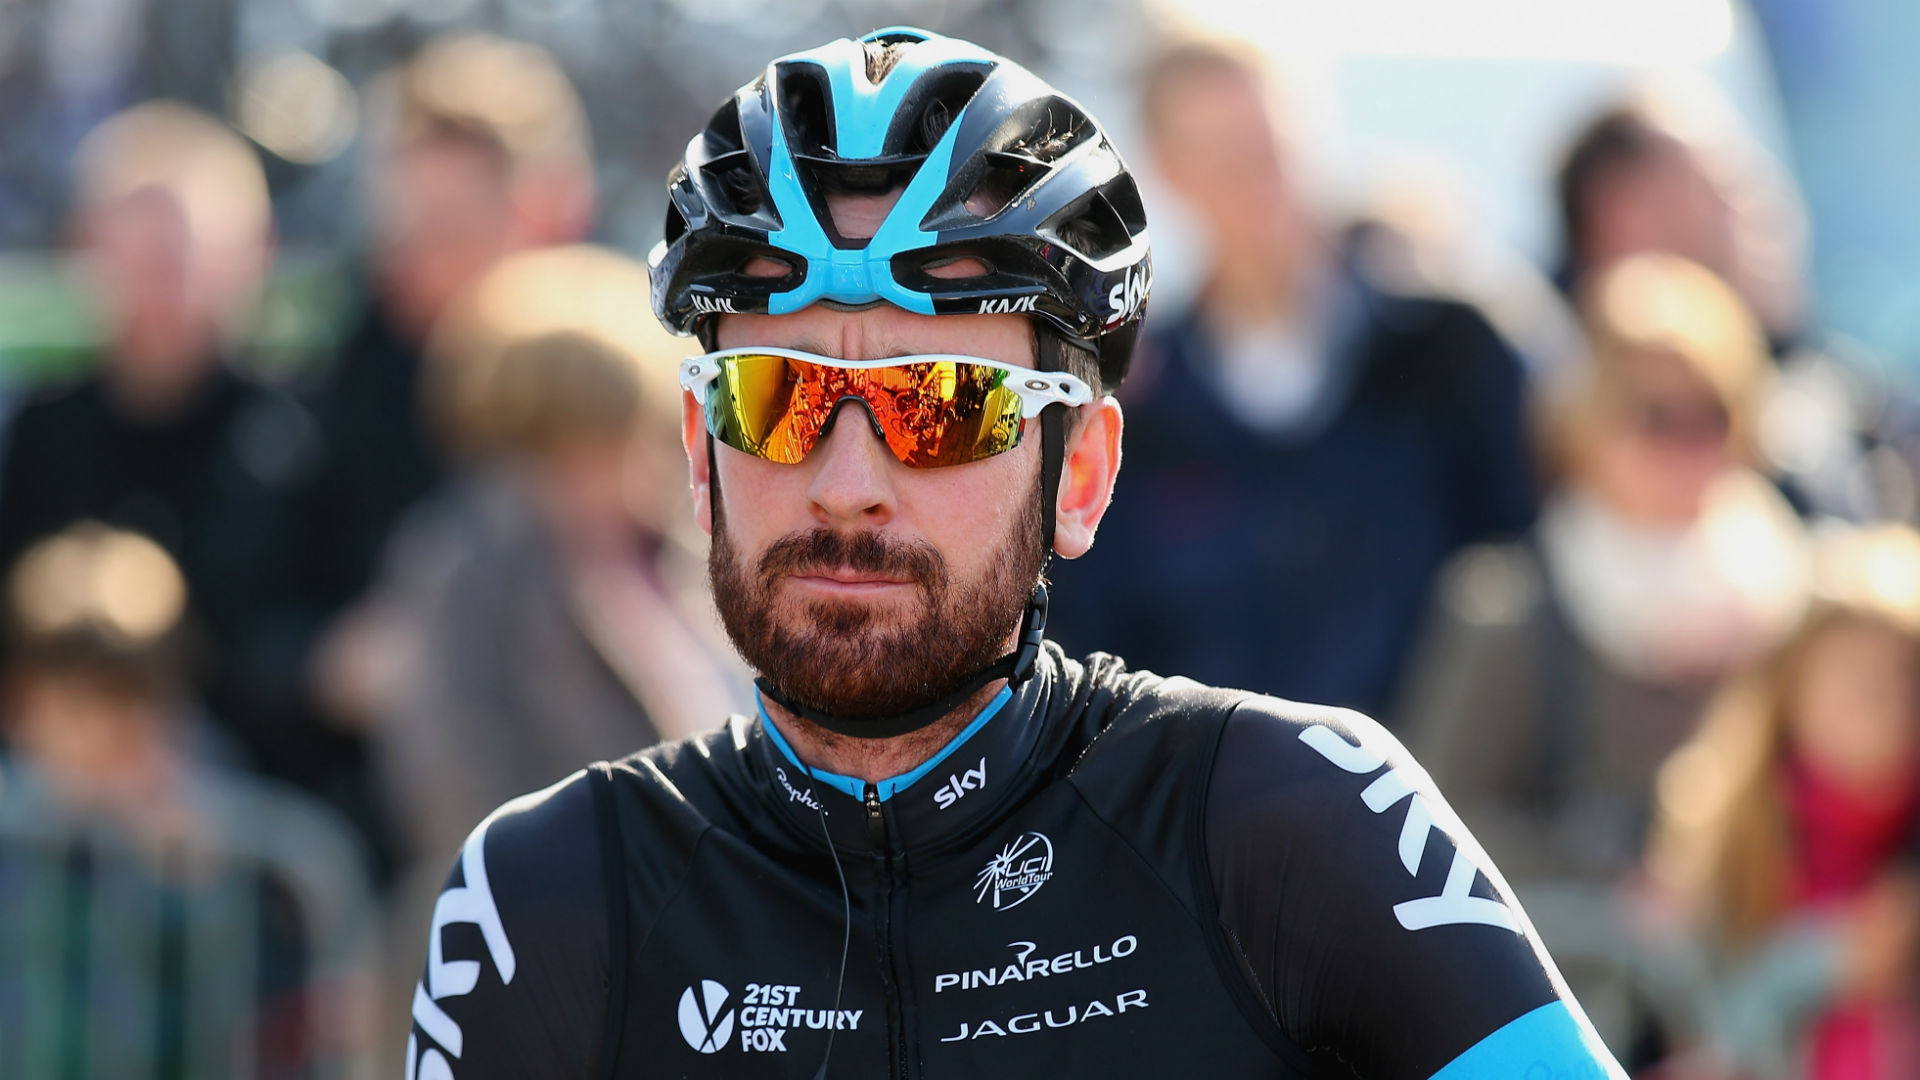 Five-time Olympic champion Bradley Wiggins has labelled allegations of cheating as "malicious".